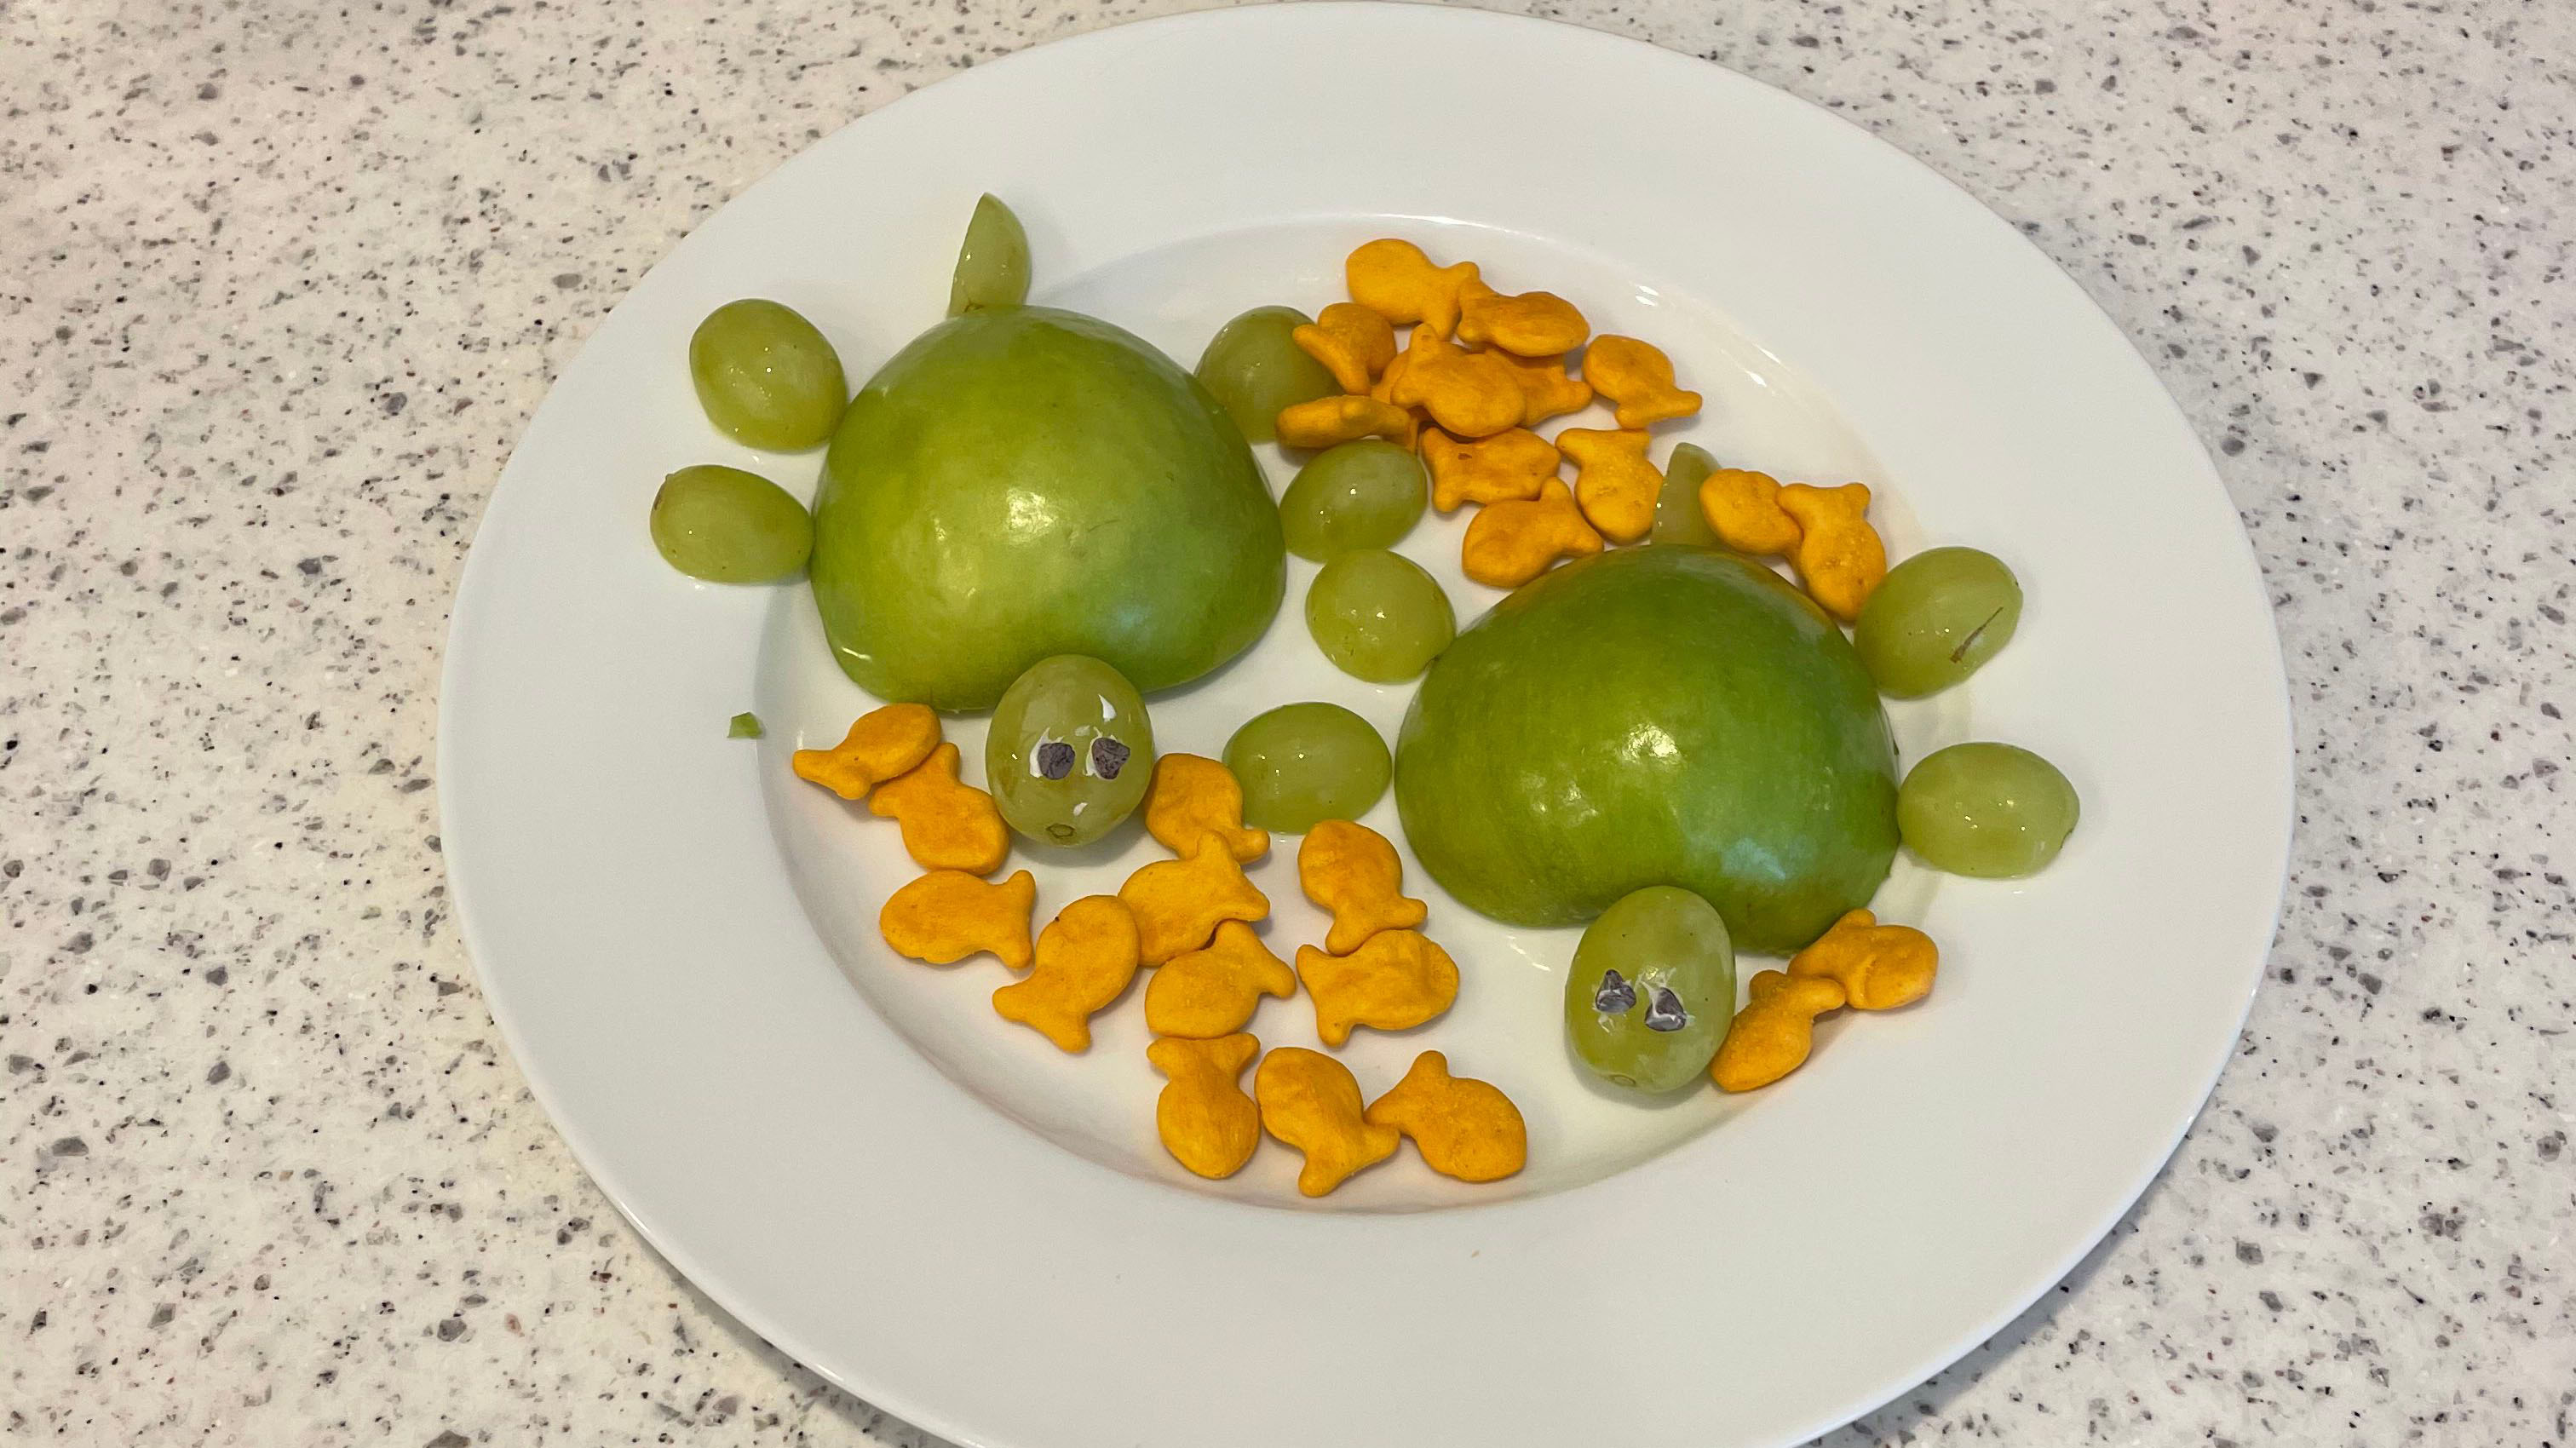 Orange fishy crackers on plate with green apples cut out in the shape of a turtle